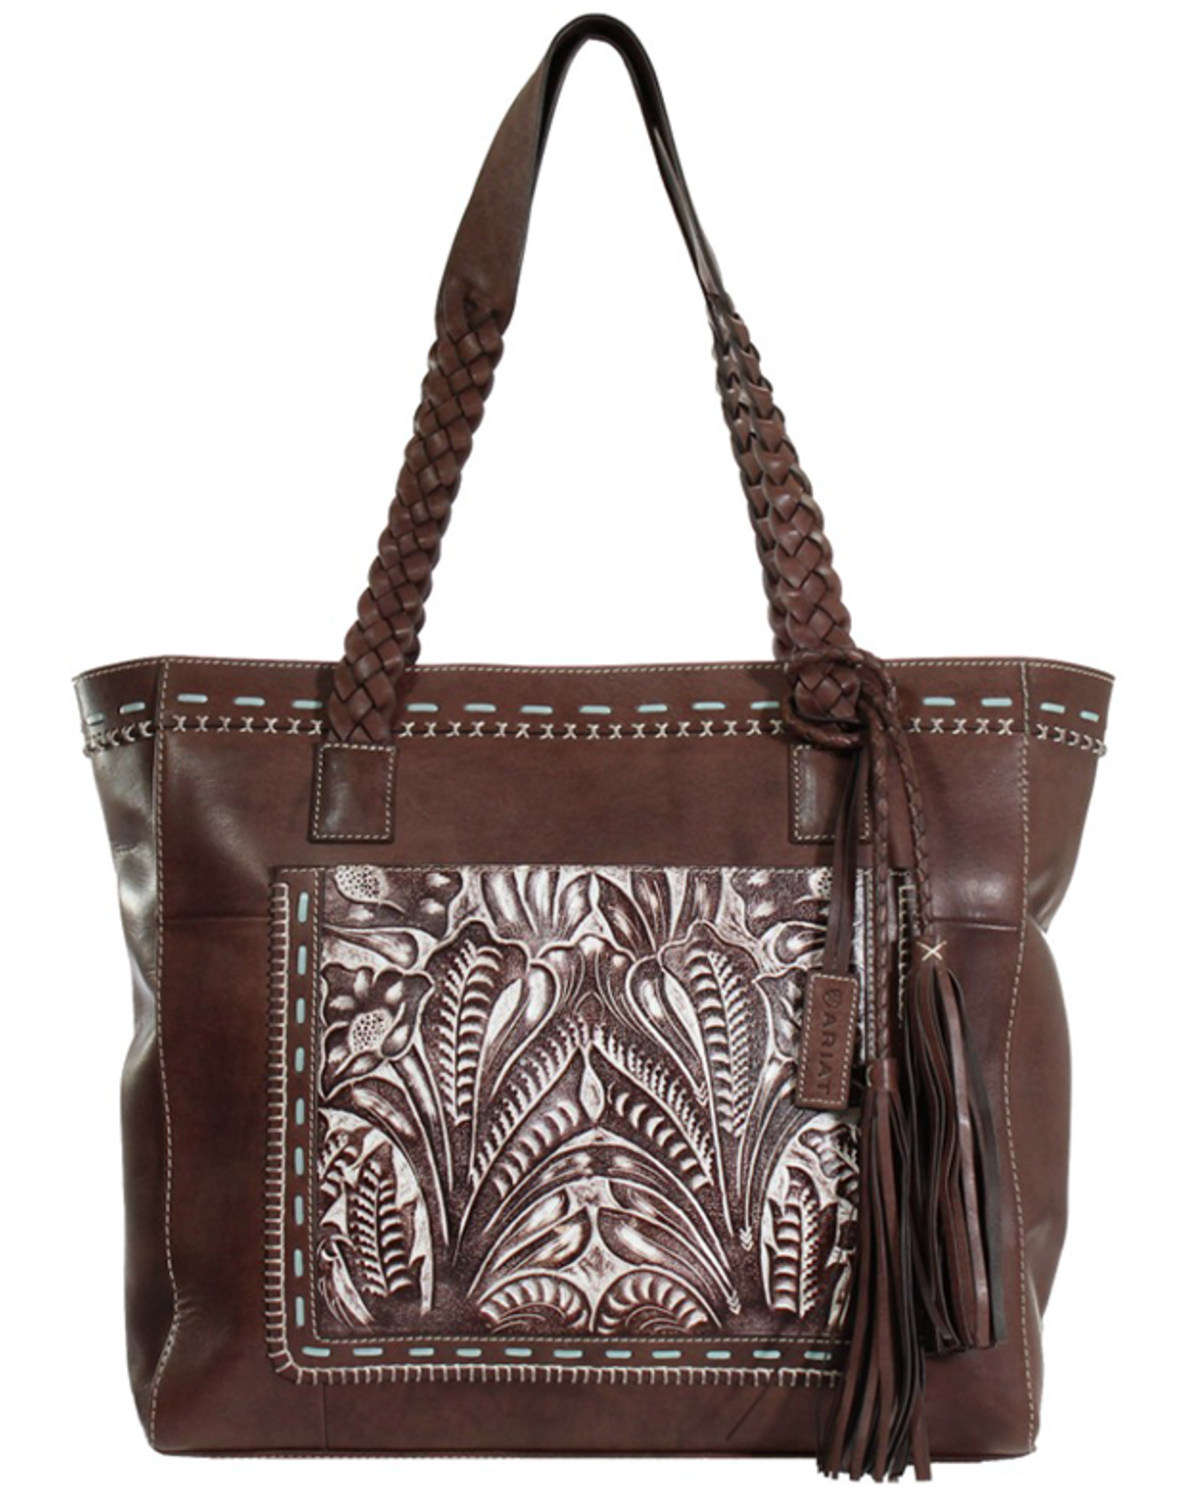 Ariat Women's Rori Concealed Carry Tote